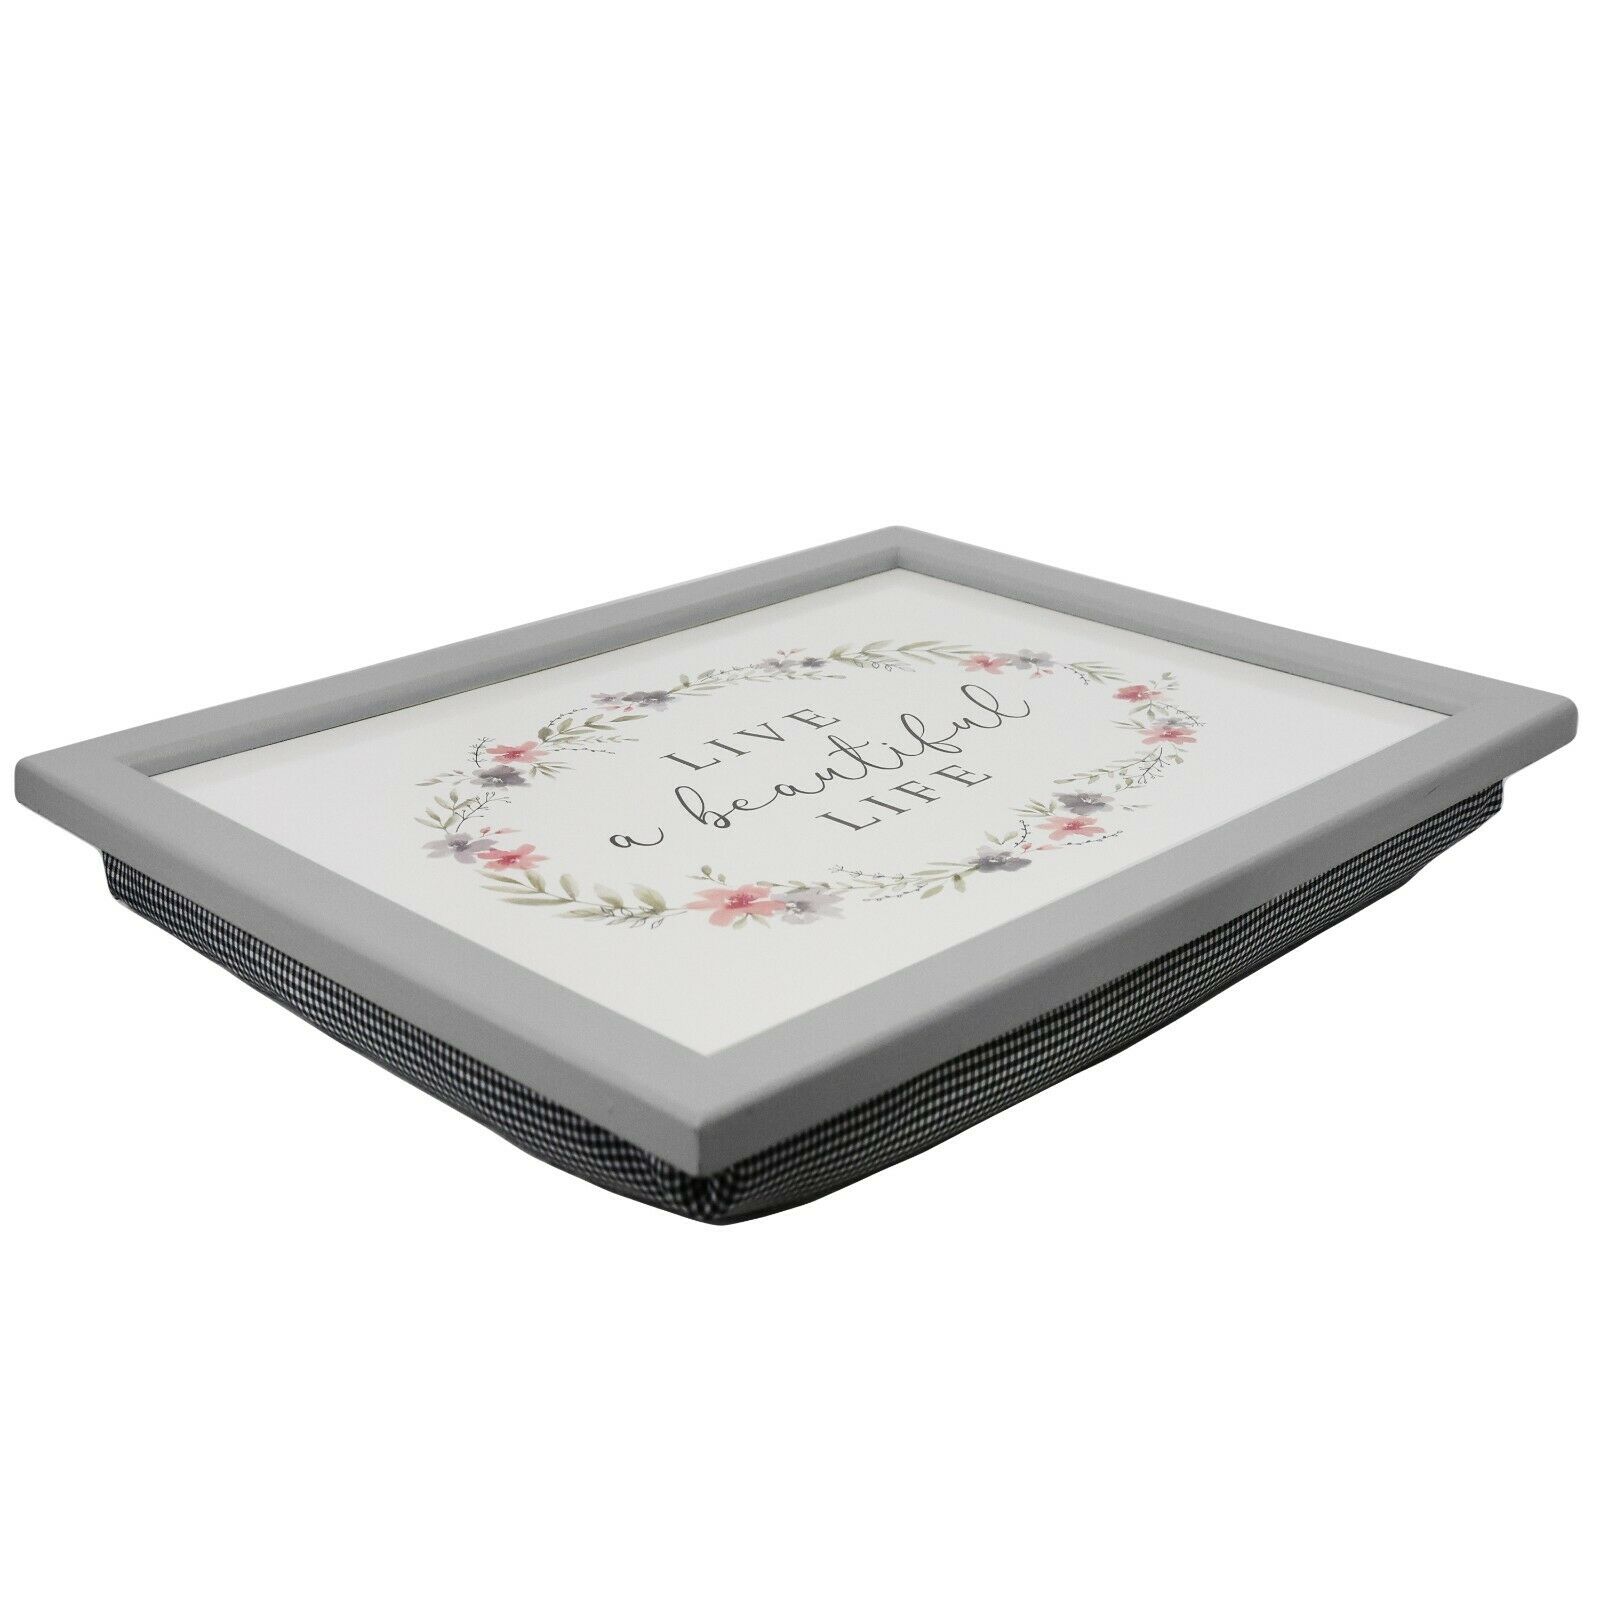 Live a Beautiful Life Lap Tray With Bean Bag Cushion The Magic Toy Shop - The Magic Toy Shop